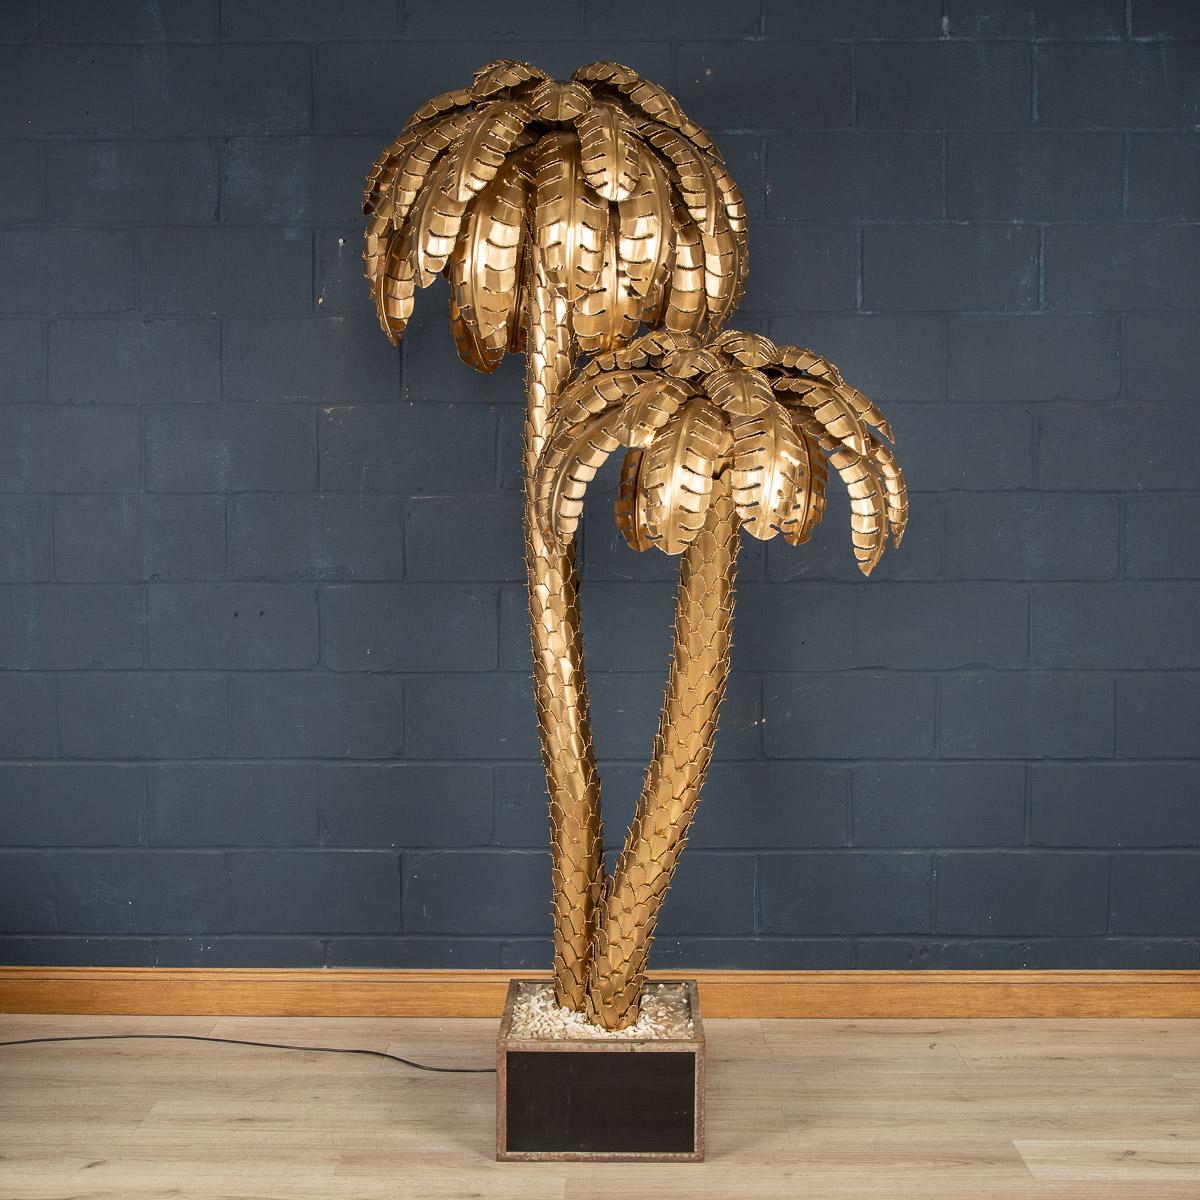 A massive and very rare Maison Jansen palm tree floor lamp dating from the 1960s/70s, with eight light points. The lamp has been constructed by hand using brass sheets overlapping each other to mimic the leaves and trunk of the plant. Of fantastic